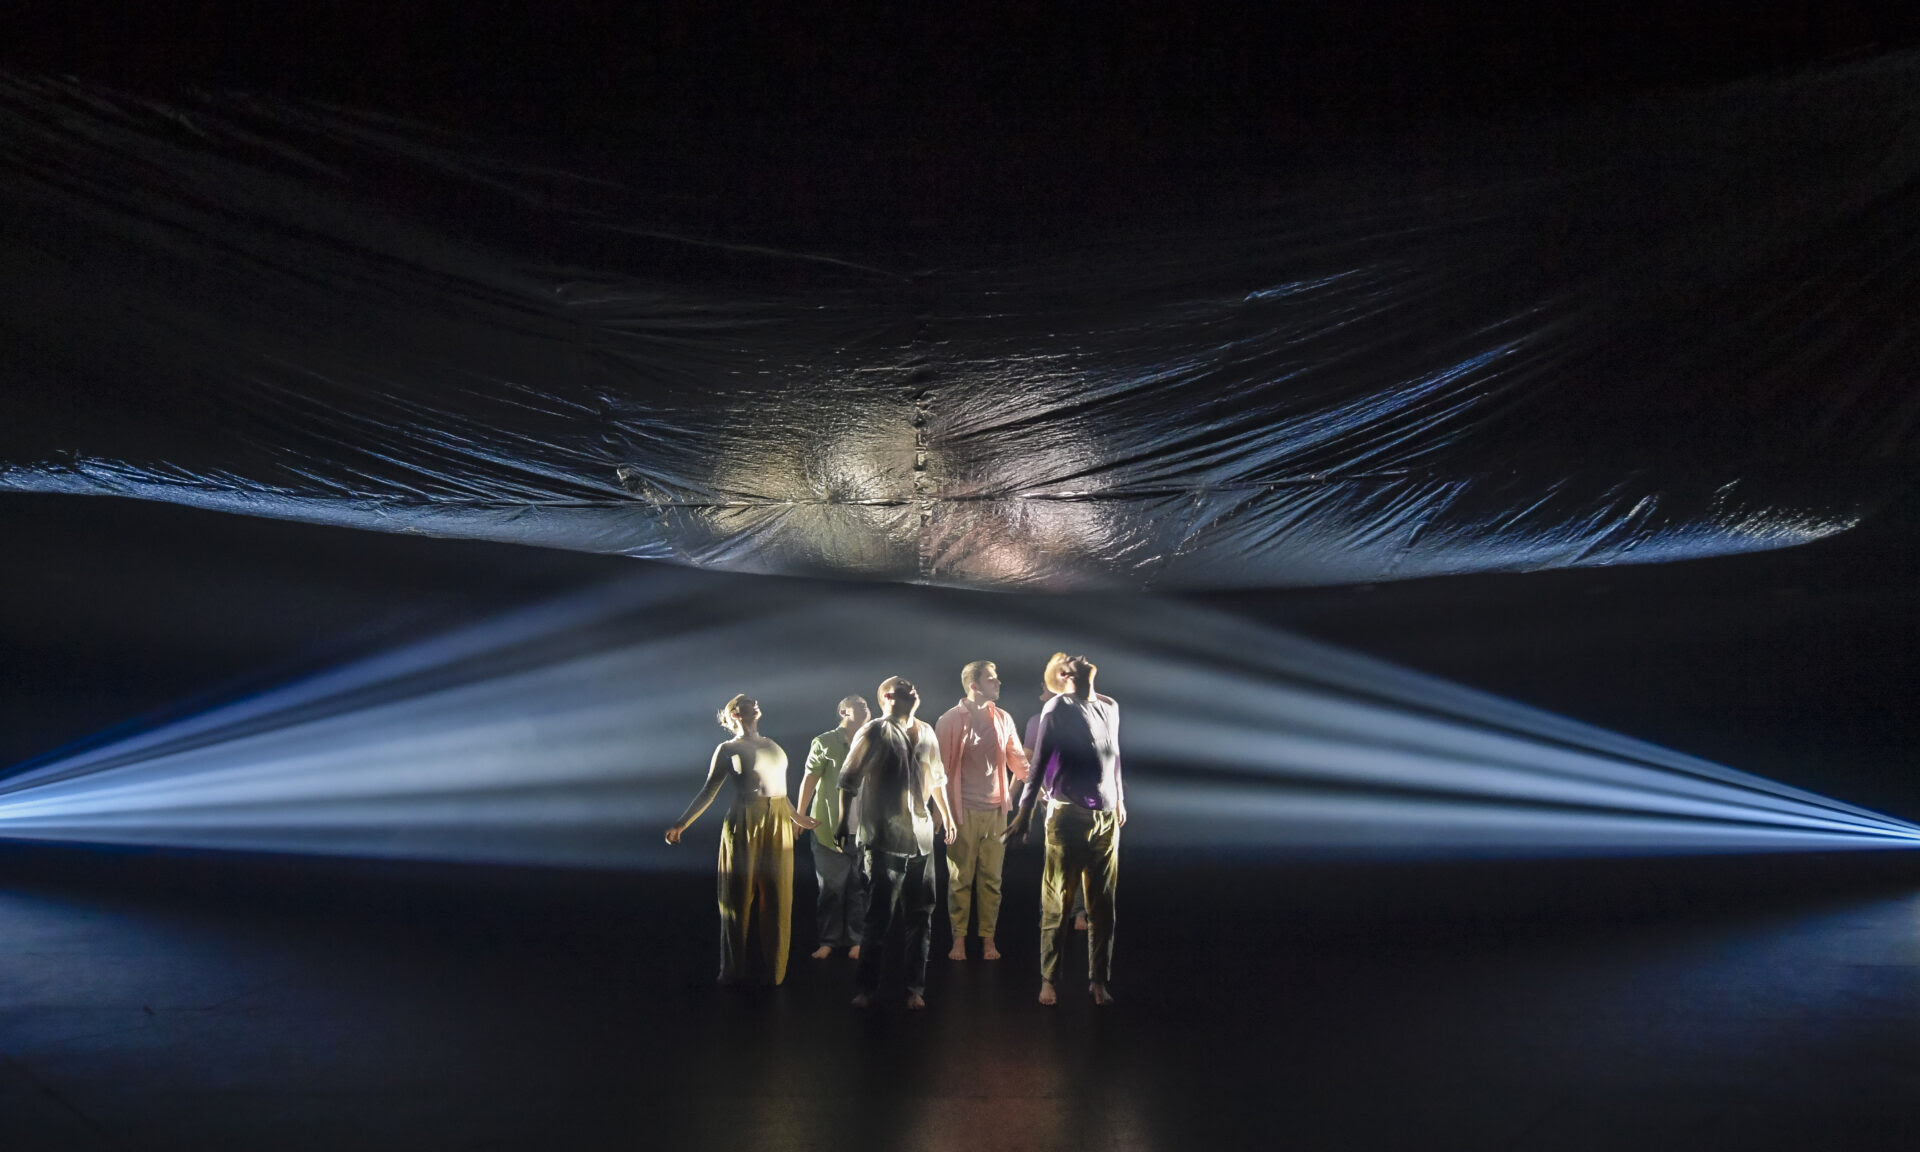 five people stand in a darkened room, wearing shirts and pants of different colours, and all looking upwards. They are gazing up at a billowing silver piece of material, that hangs above them and balloons out in the middle. Lights are shining from either side of the room onto the people and the silver material, which reflects the light off its metallic surface.